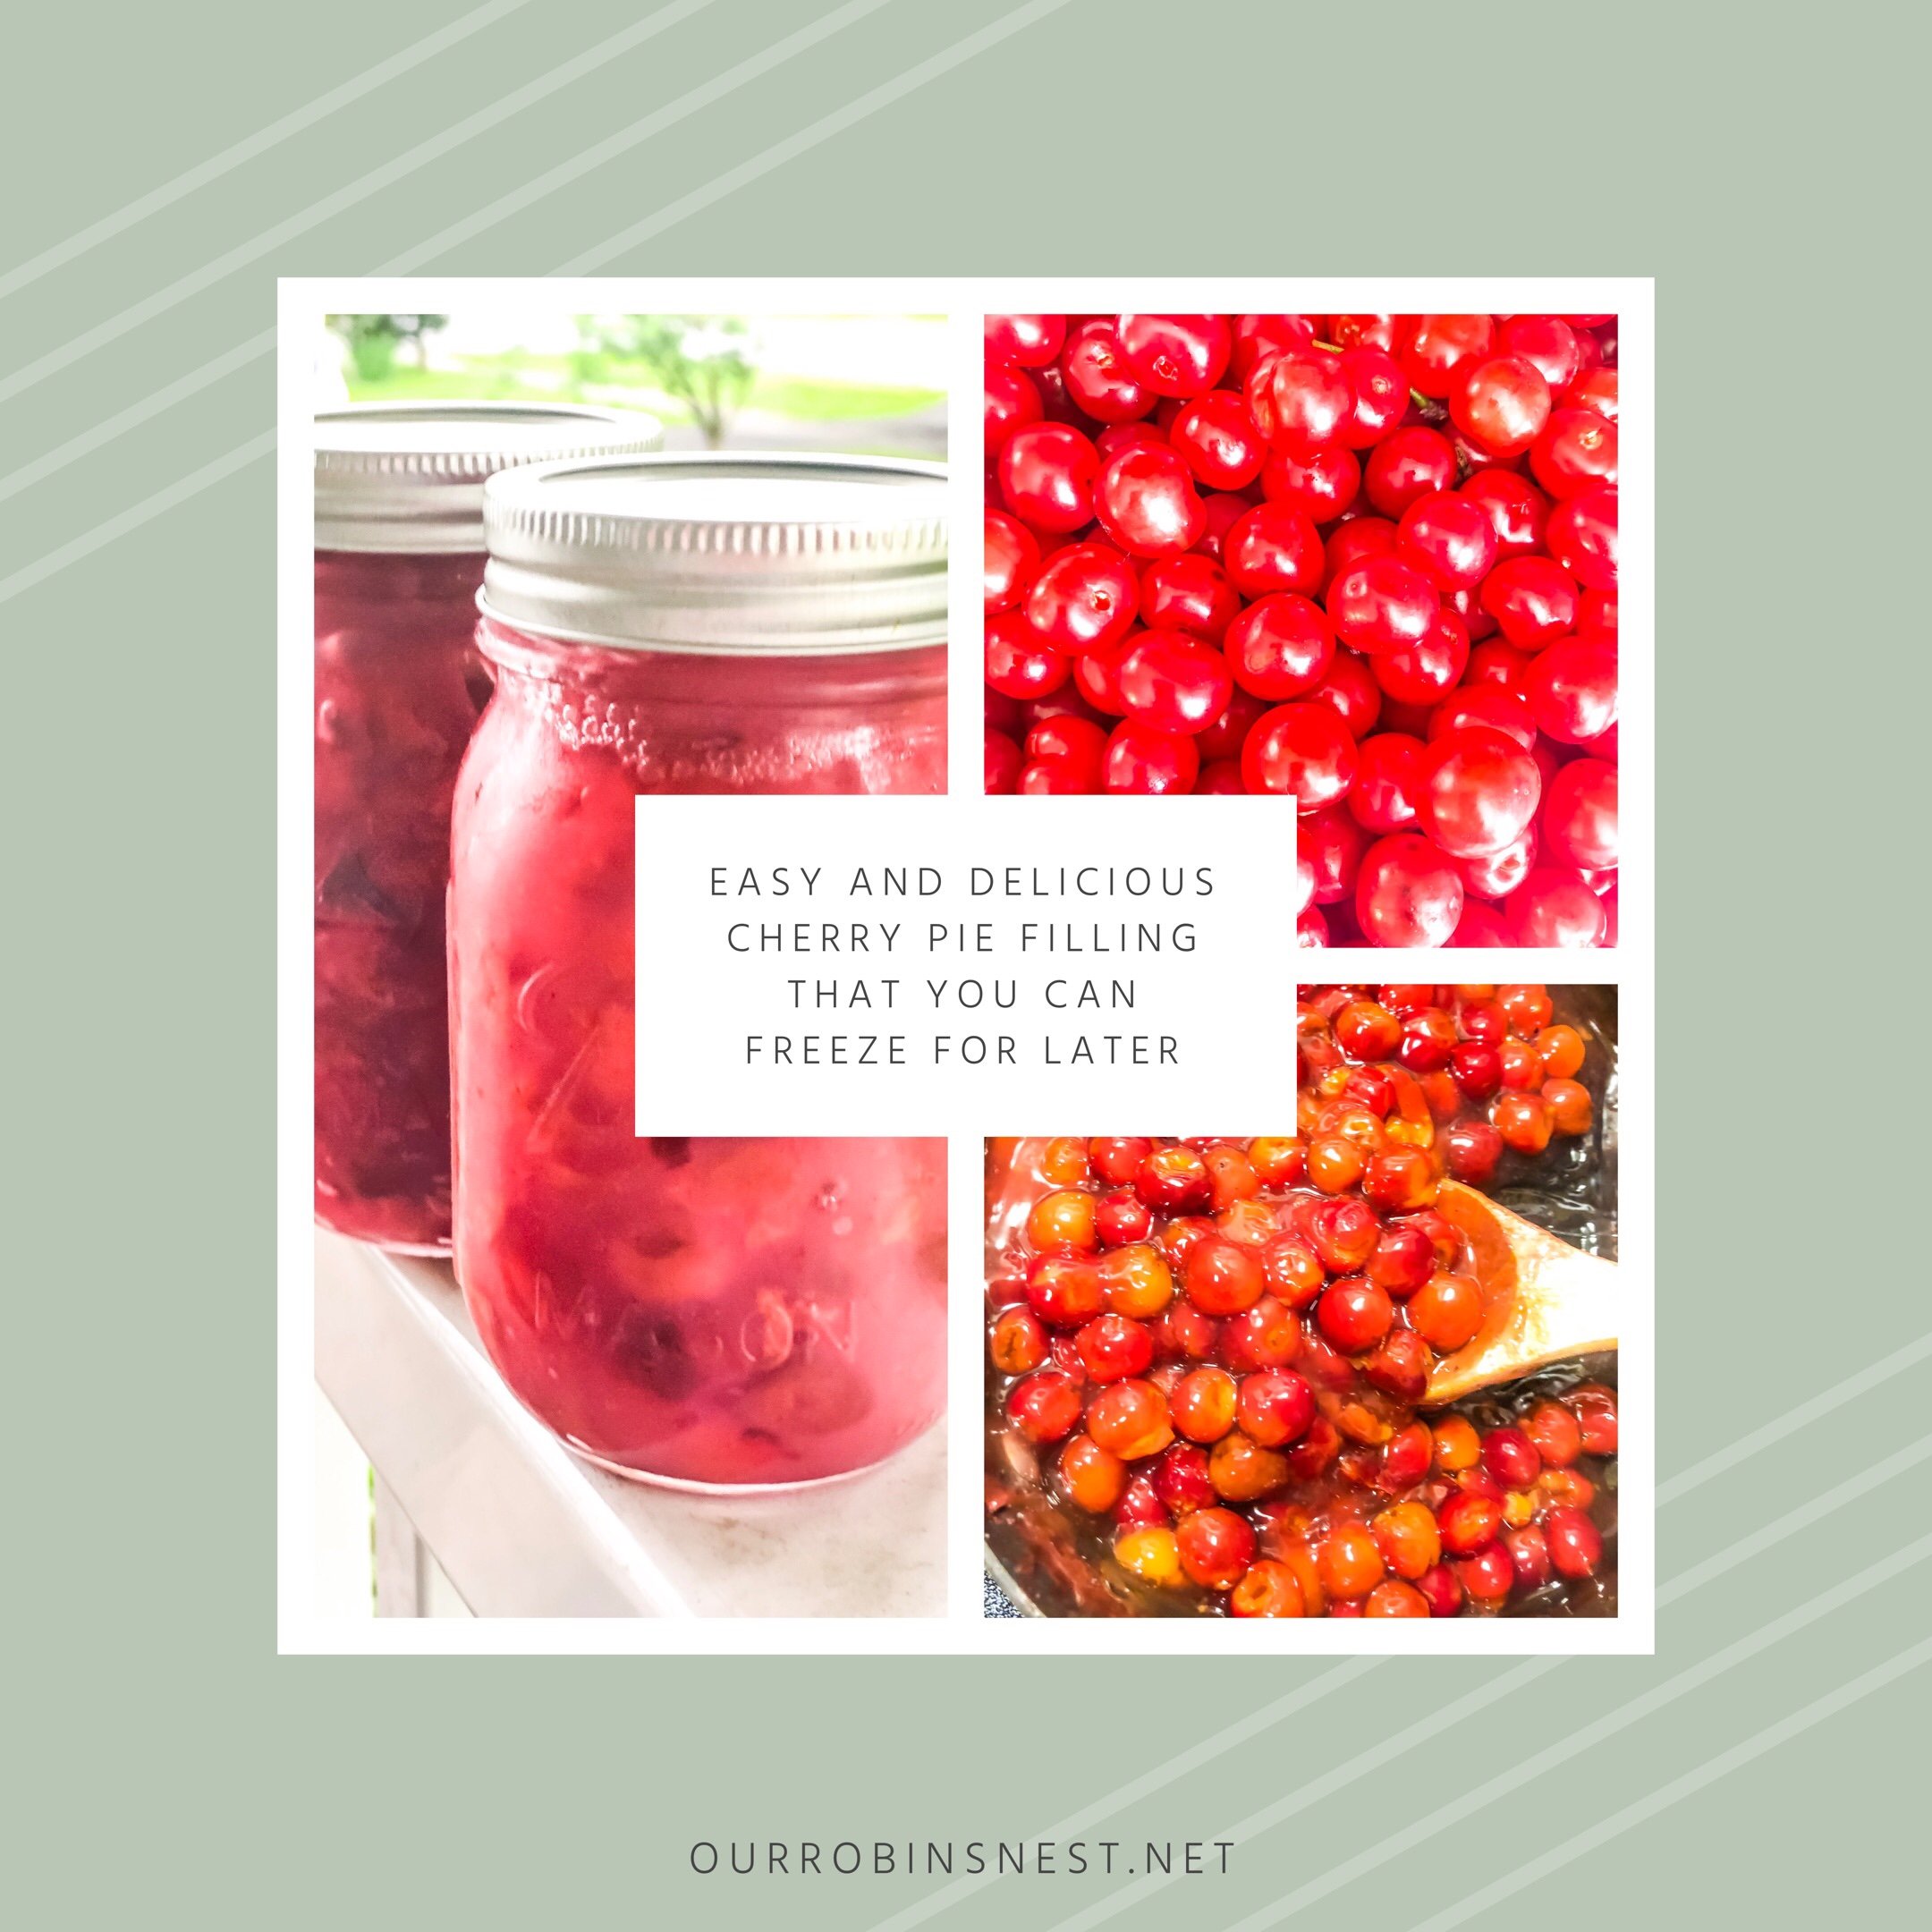 easy and delicious cherry pie filling